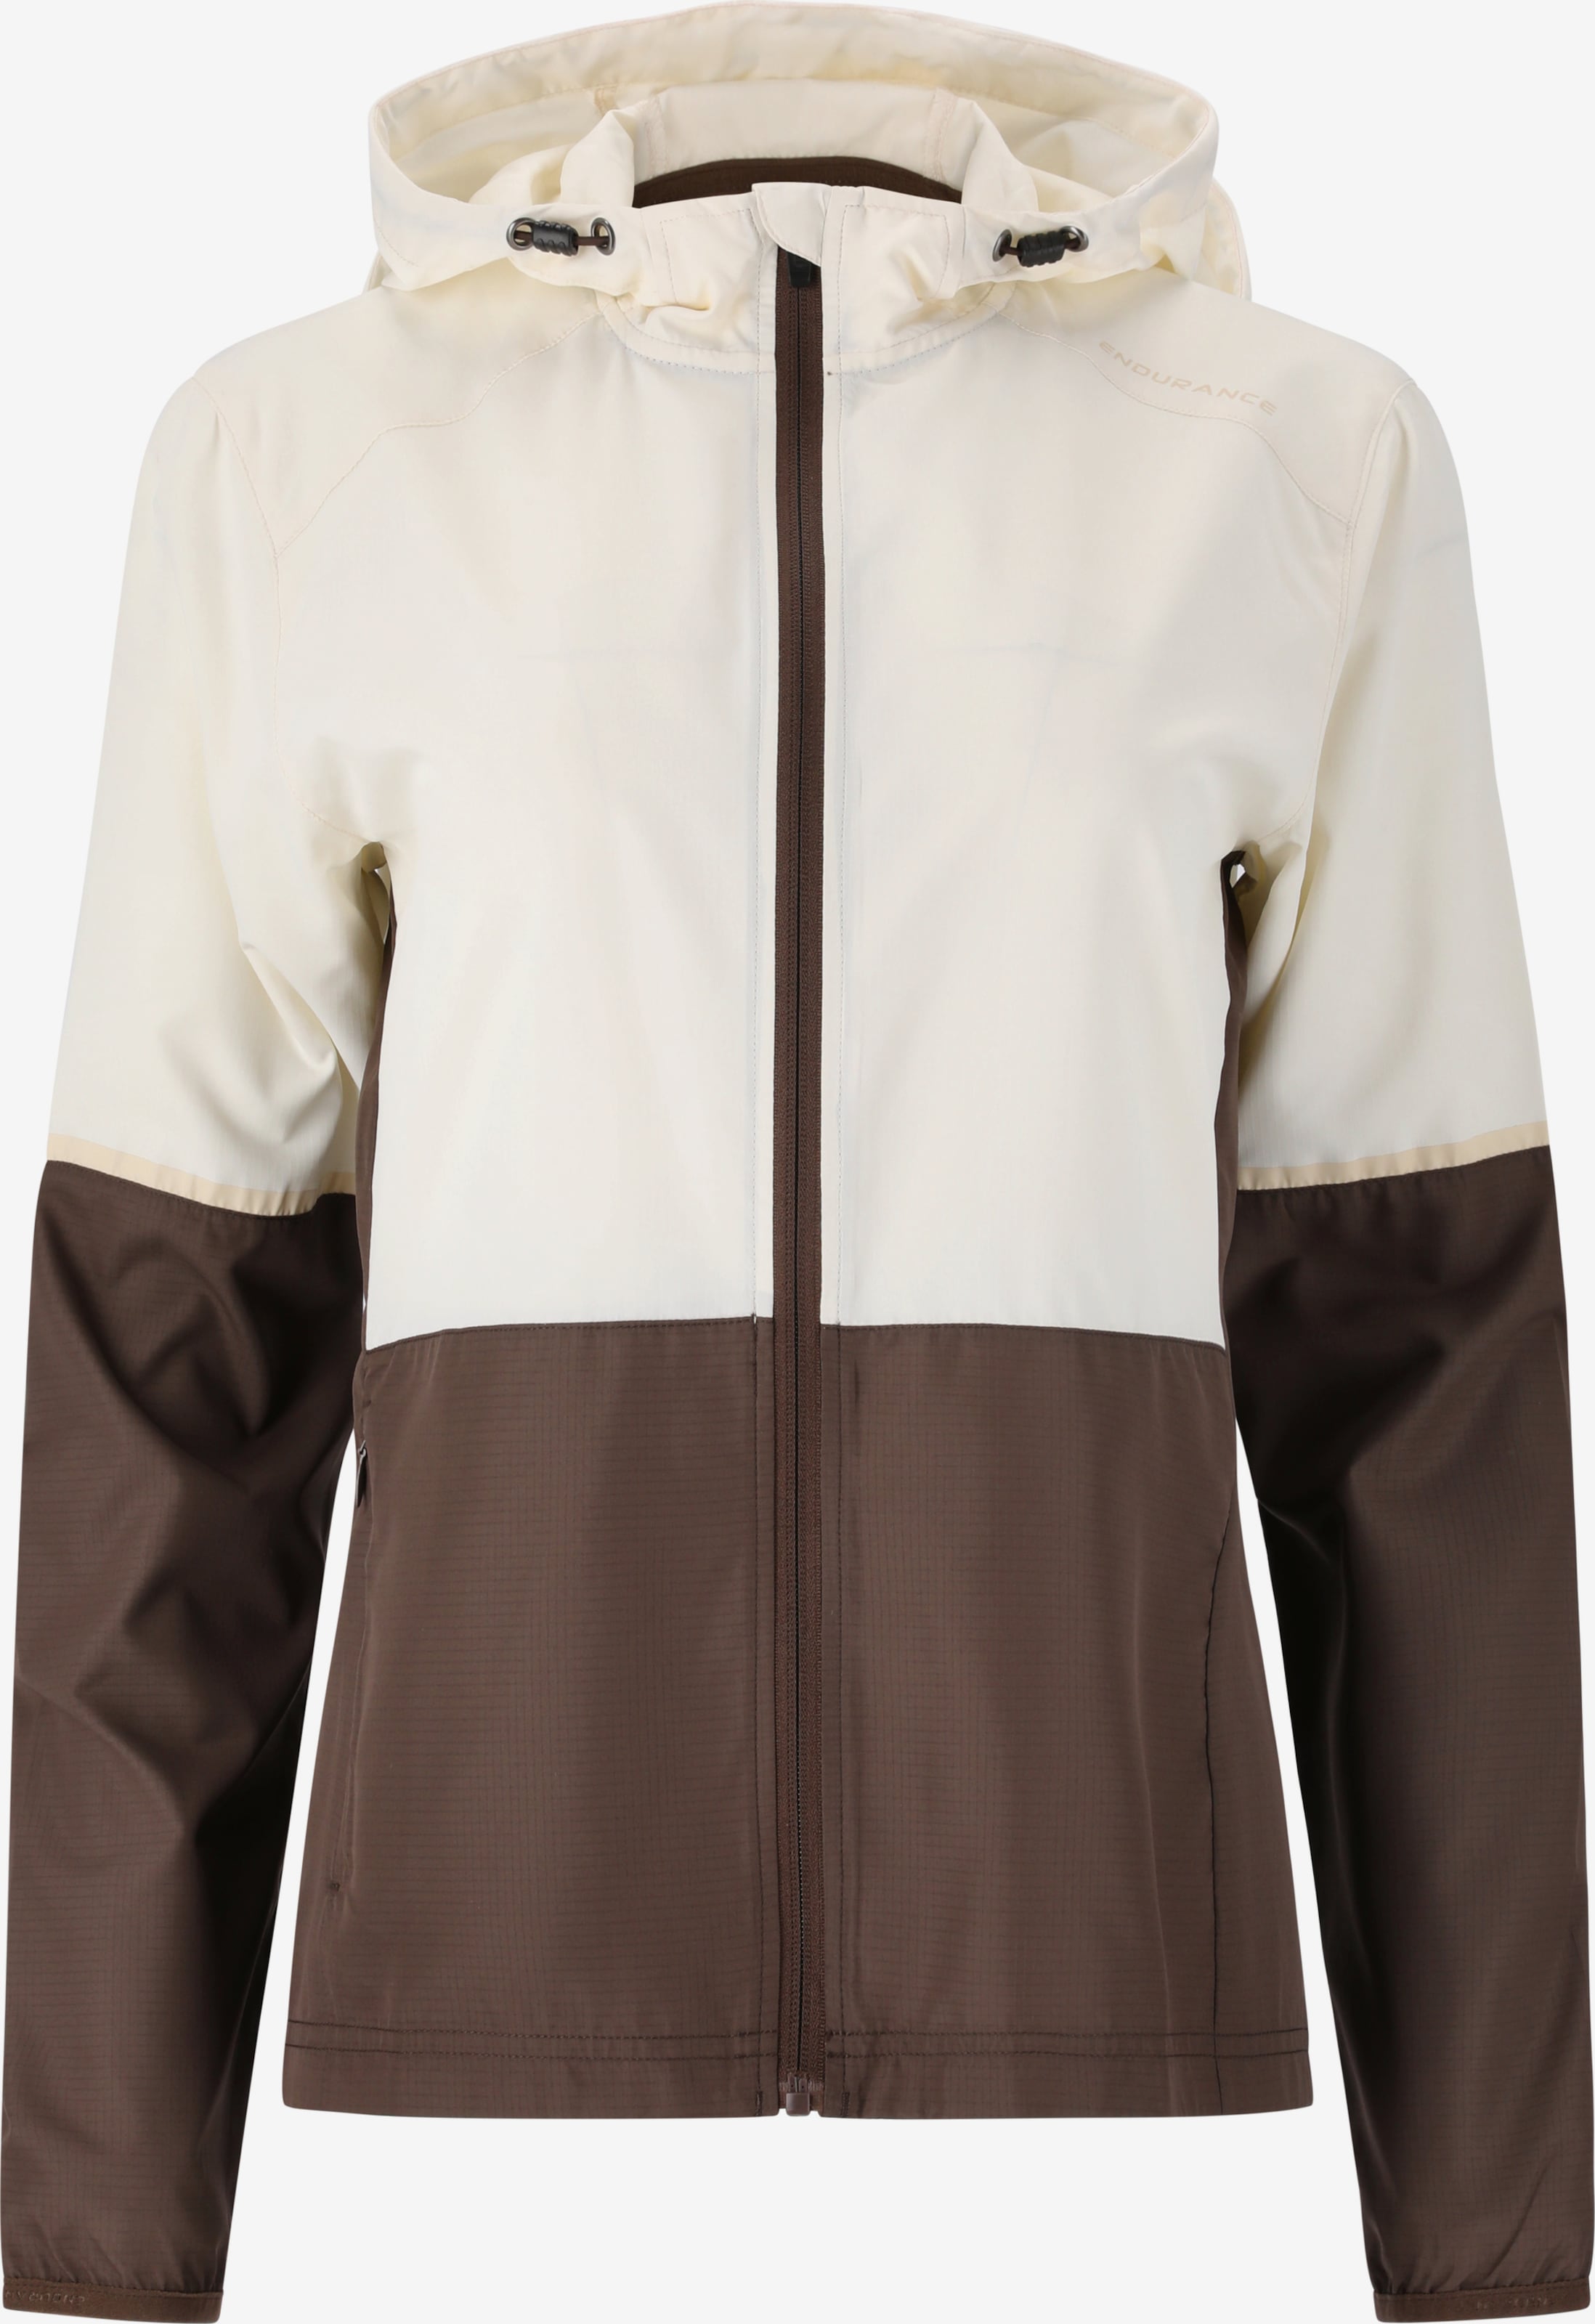 ENDURANCE Athletic ABOUT | Beige in YOU Jacket Kinthar\' 